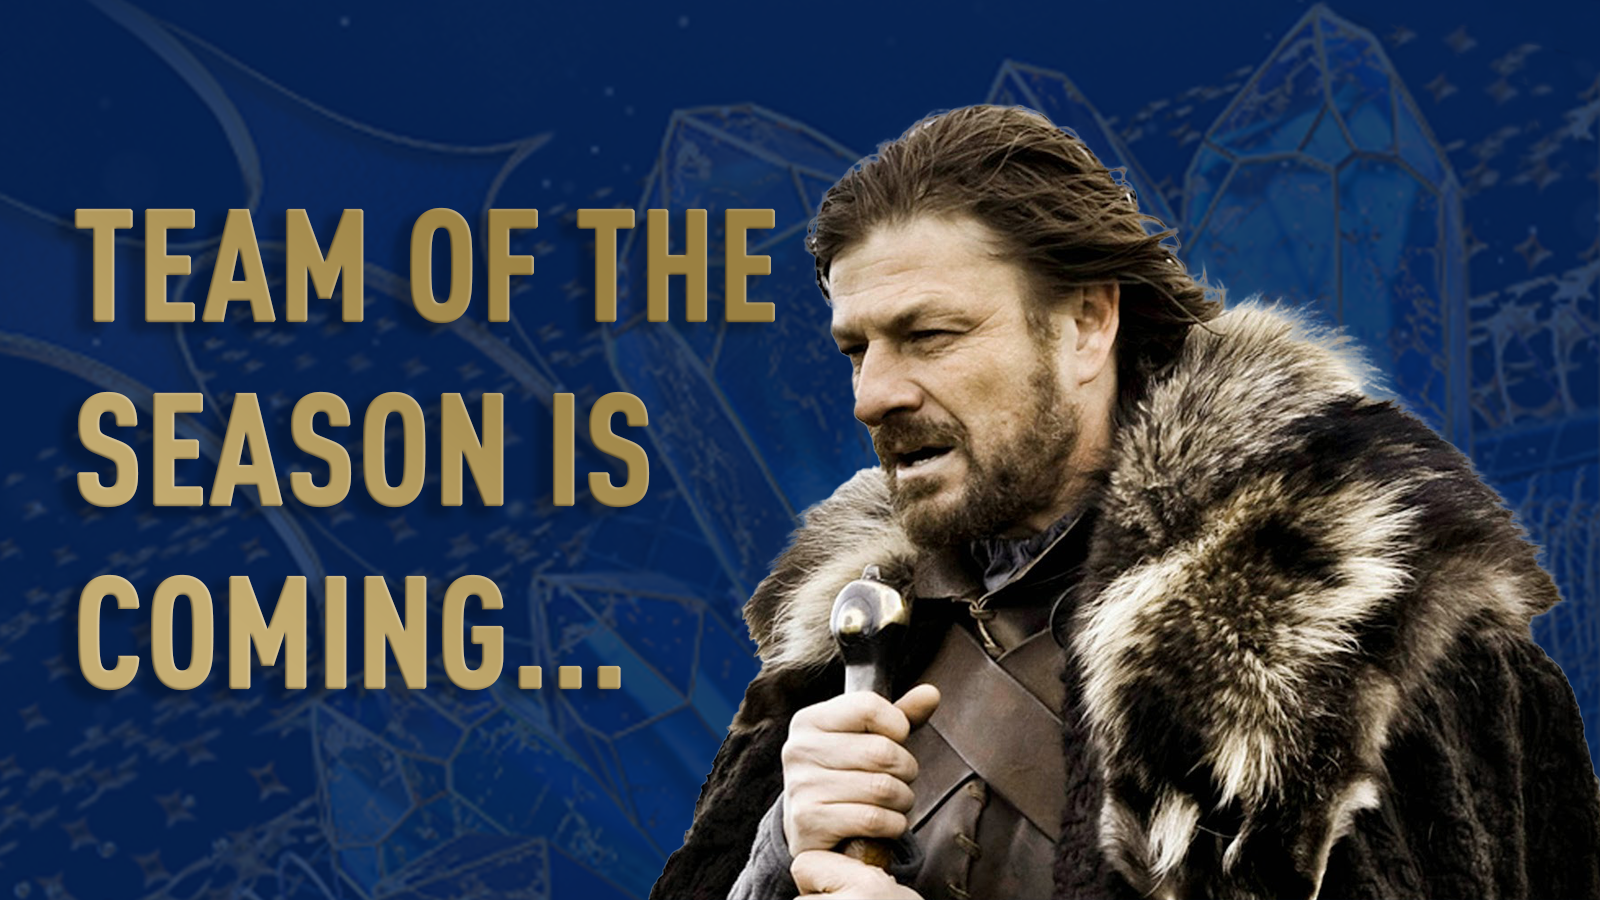 Team of the Season Ned Stark How To Grind Packs in TOTS Warm up